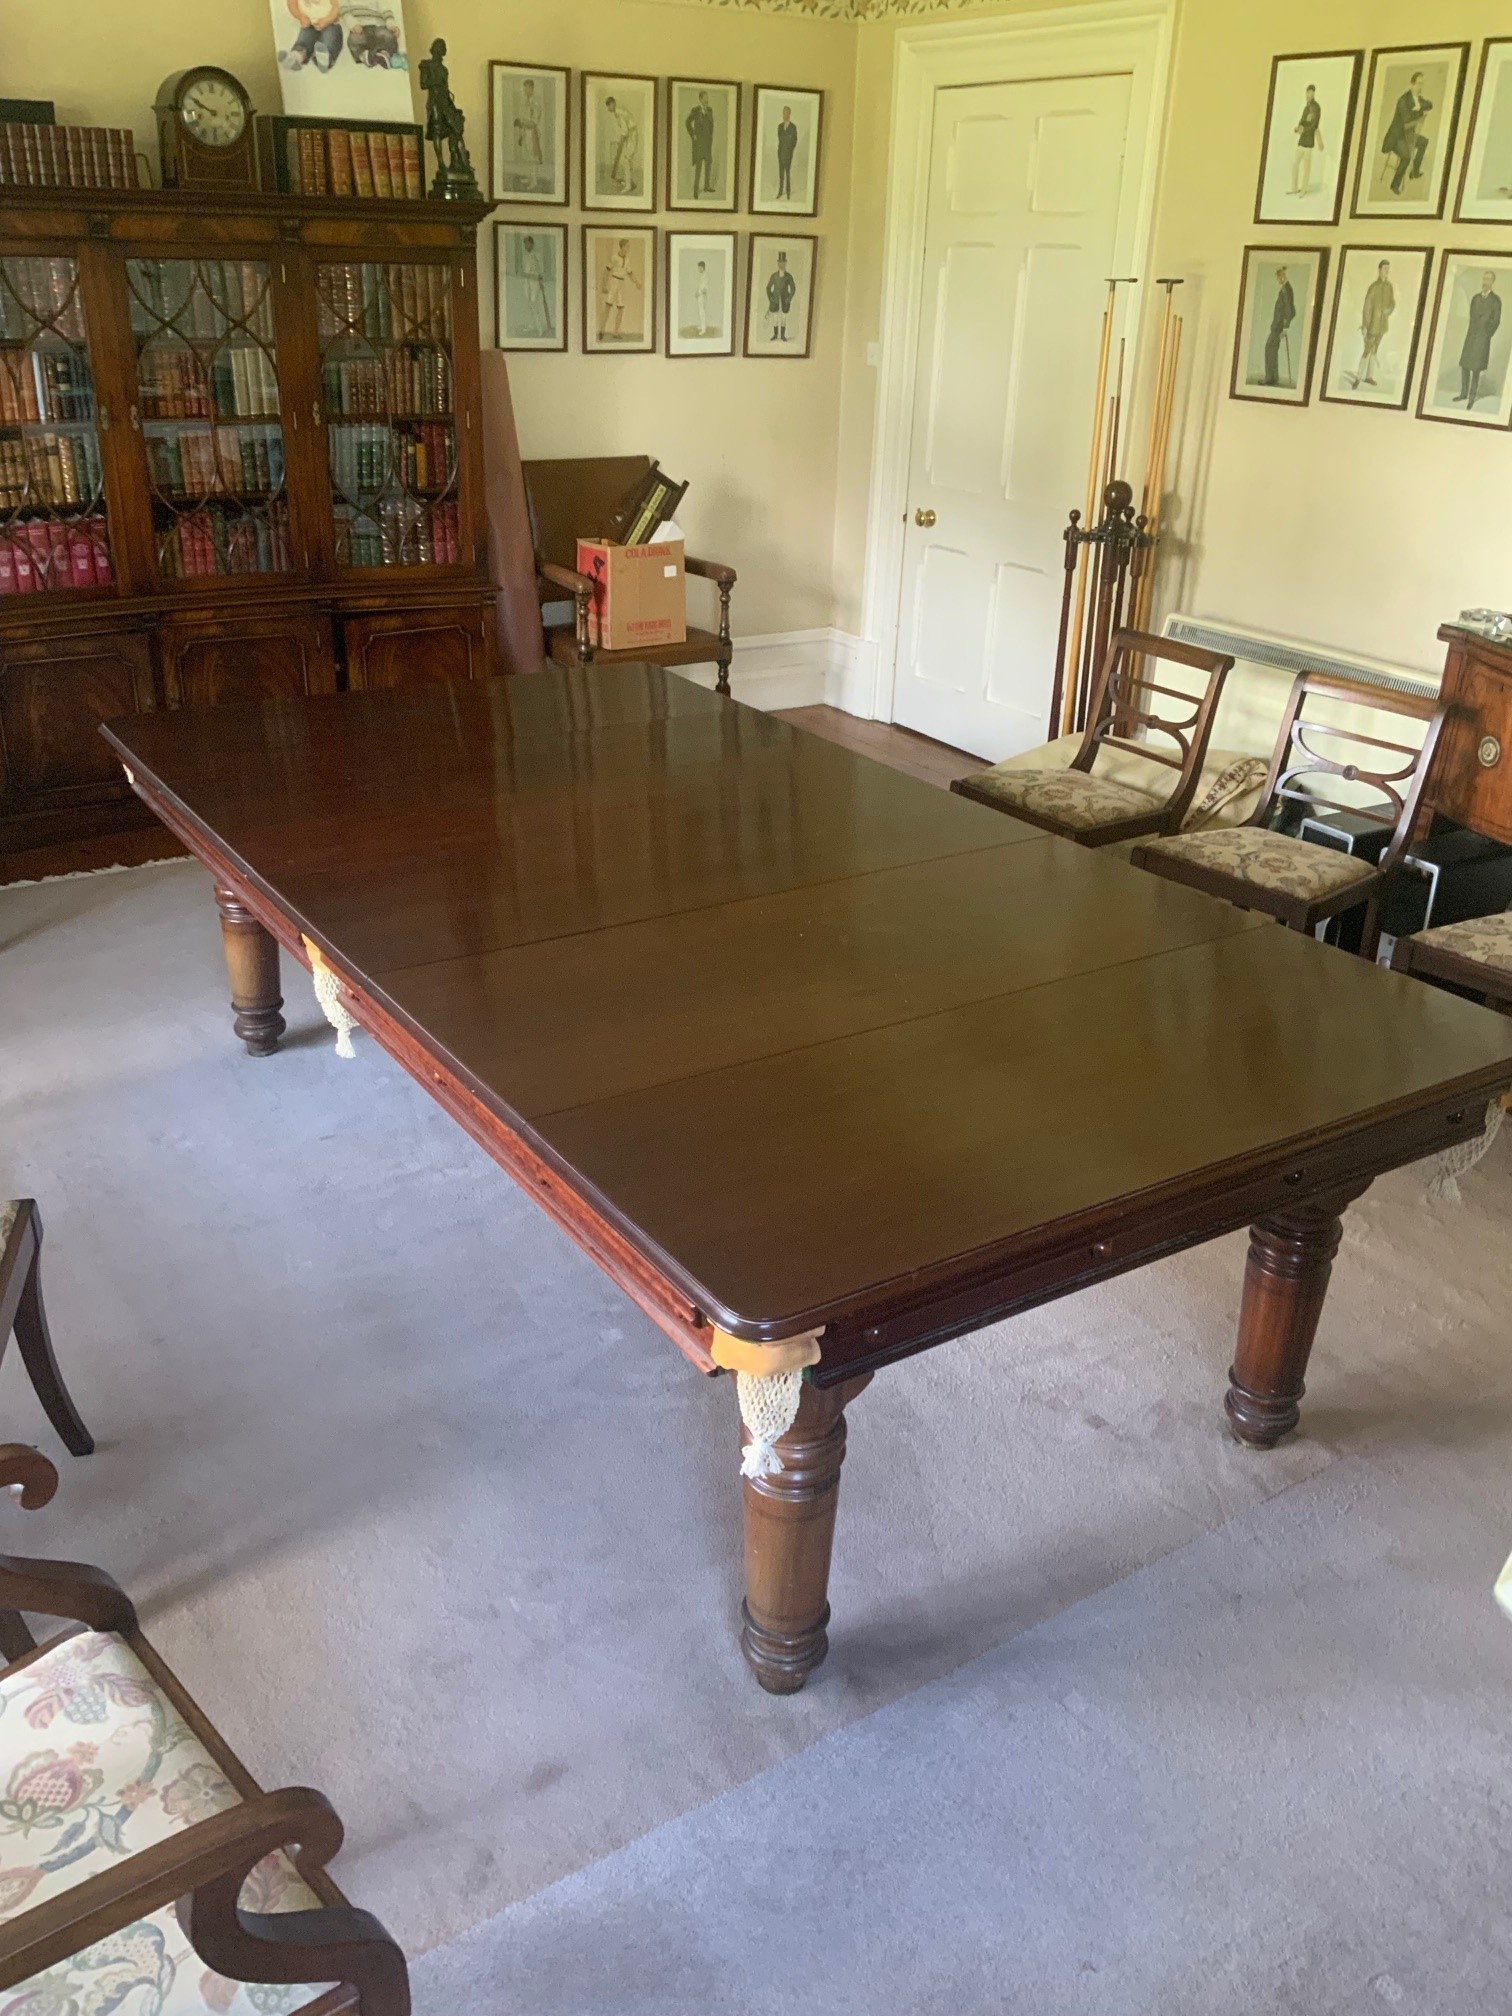 A Hamilton and Tucker mahogany three-quarter size snooker dining table, the table top with five removable leaves, and incorporating a rise and fall mechanism to enable play at the correct height, raised on turned baluste